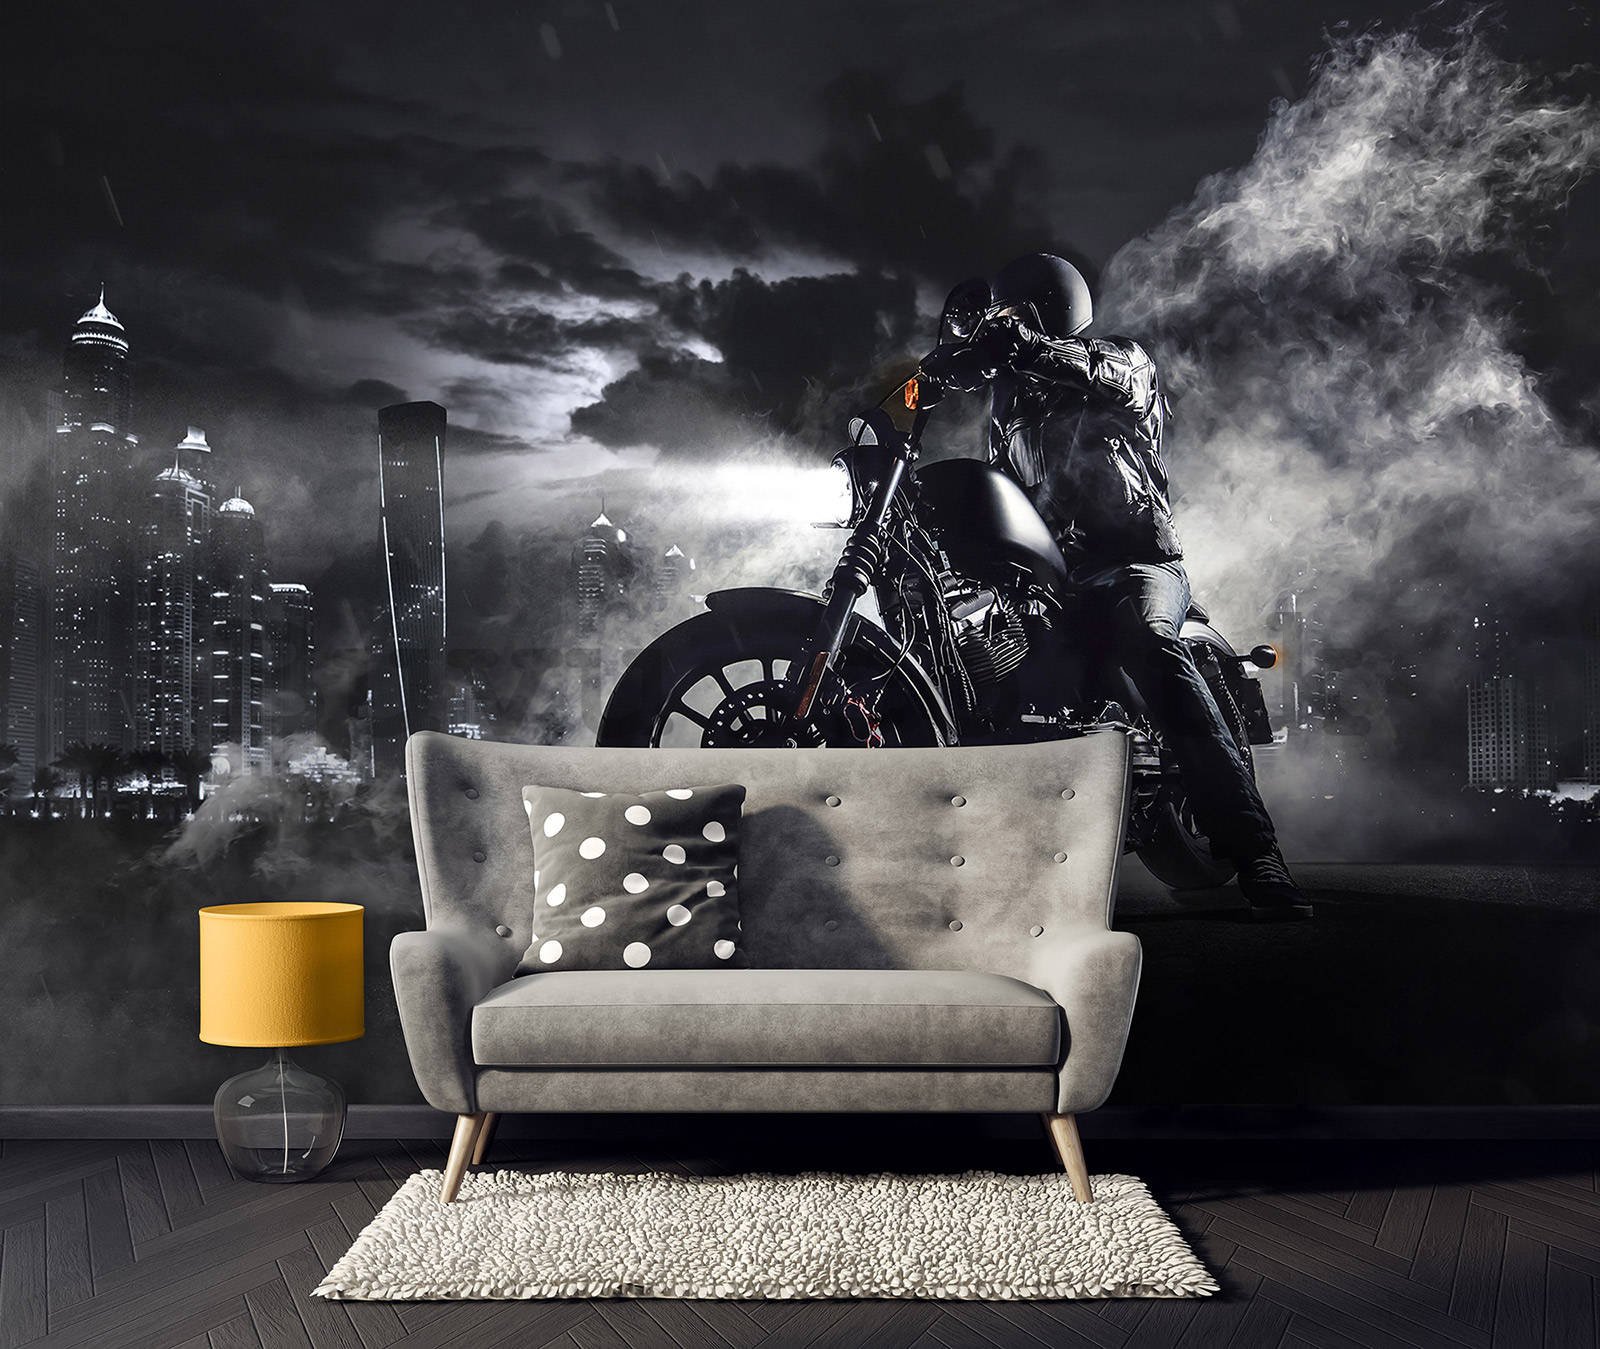 Wall mural vlies: Motorcyclist in the night city - 416x254 cm